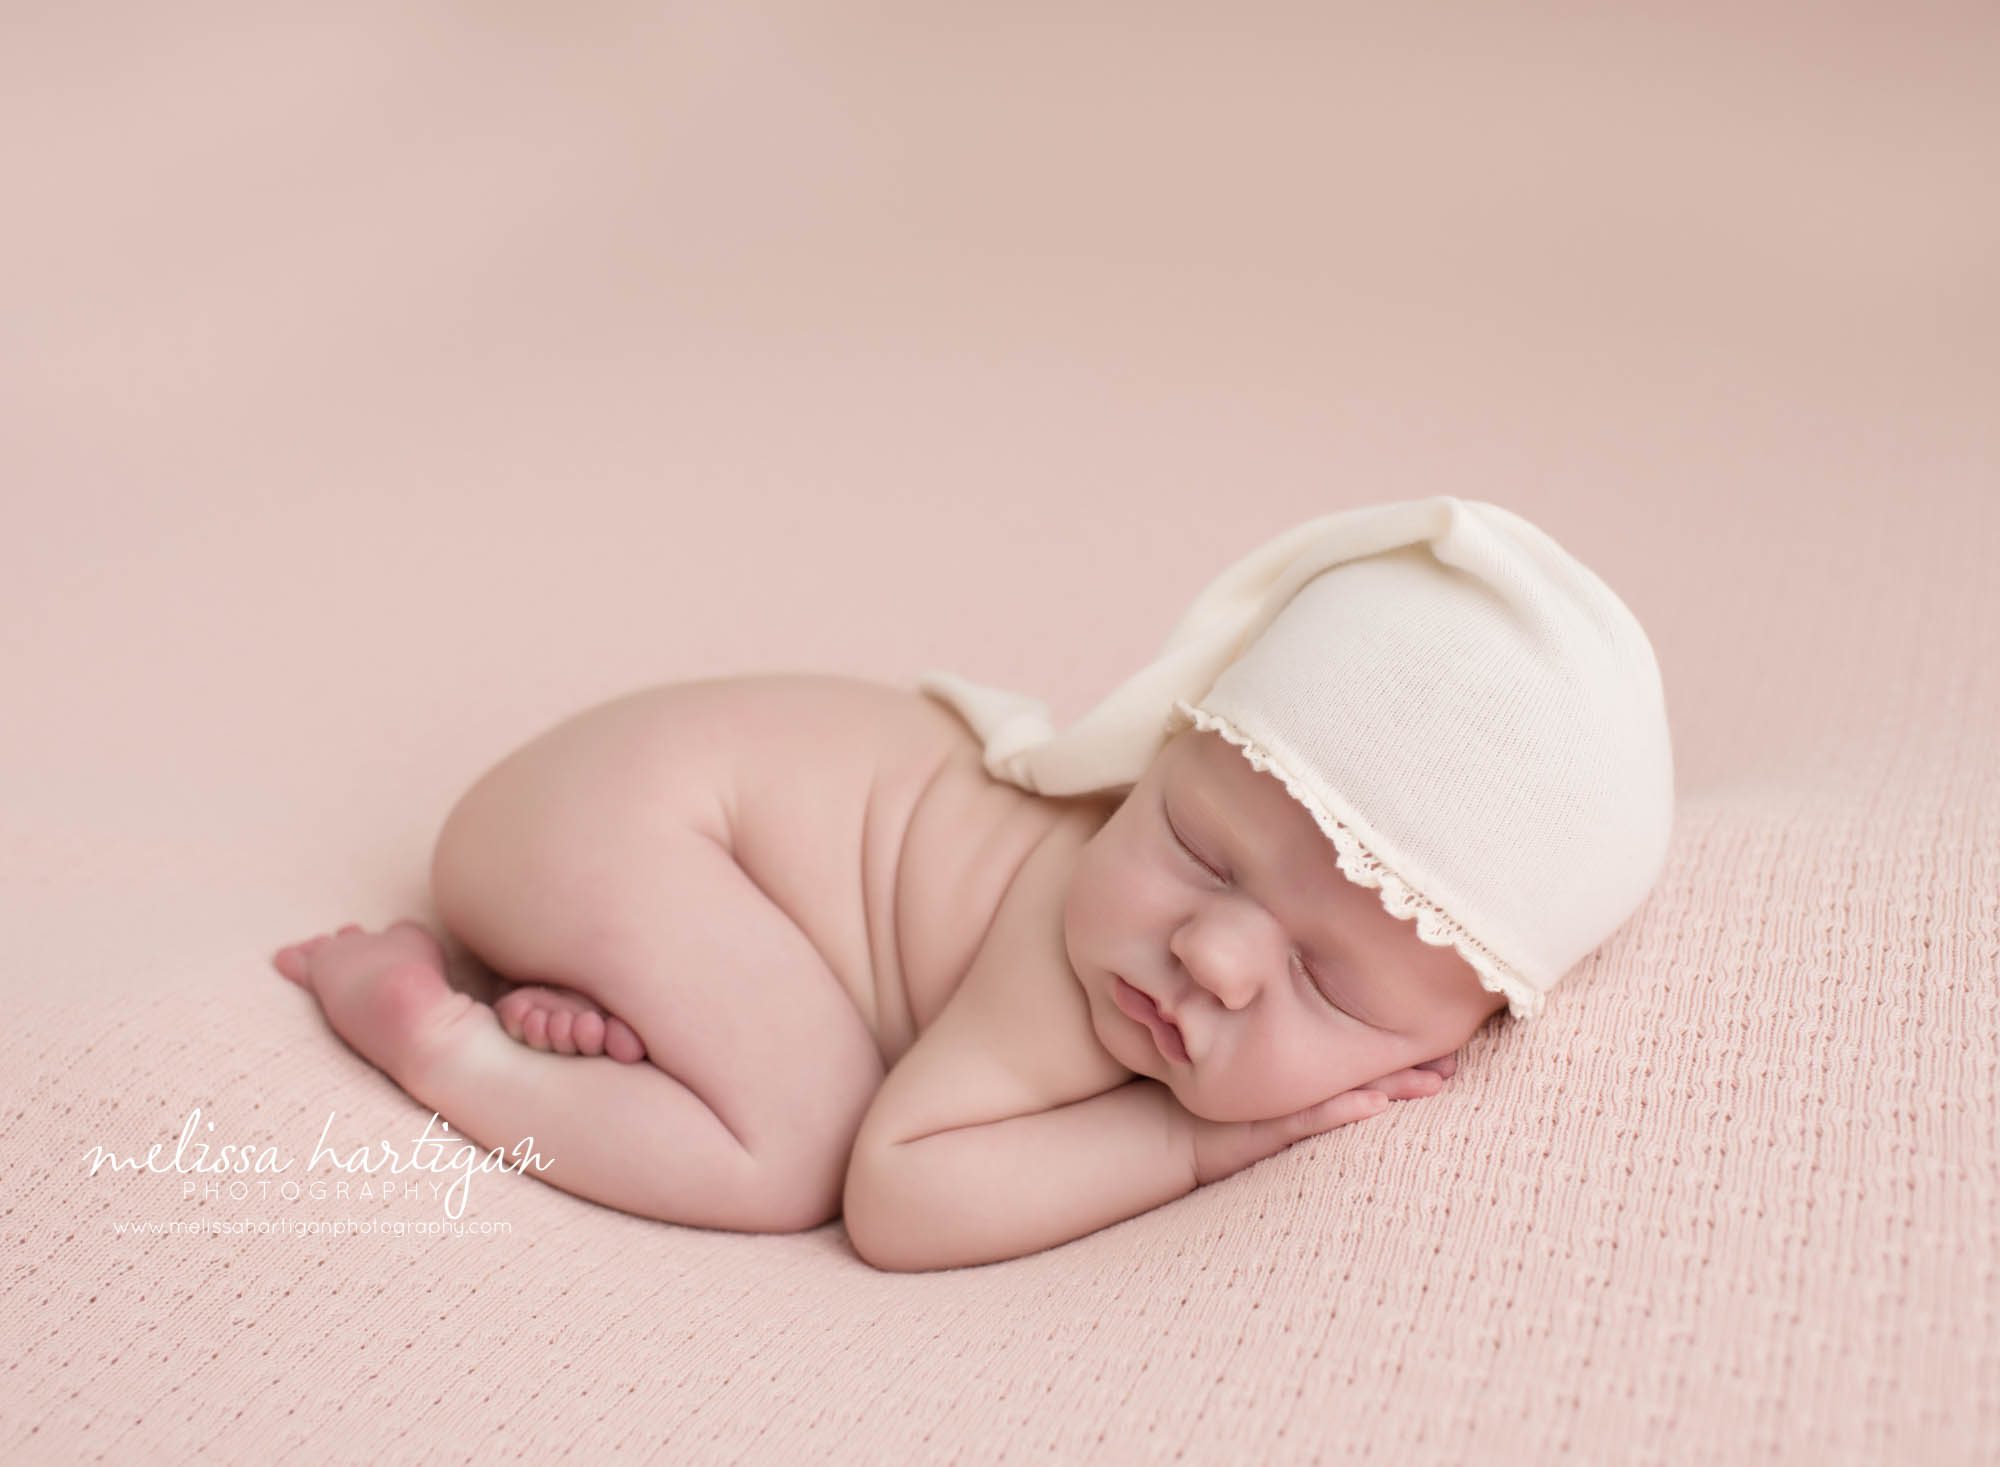 Melissa Hartigan Photography Connecticut Newborn Photographer in Coventry baby girl sleeping on pink blanket wearing a light pink knit hat